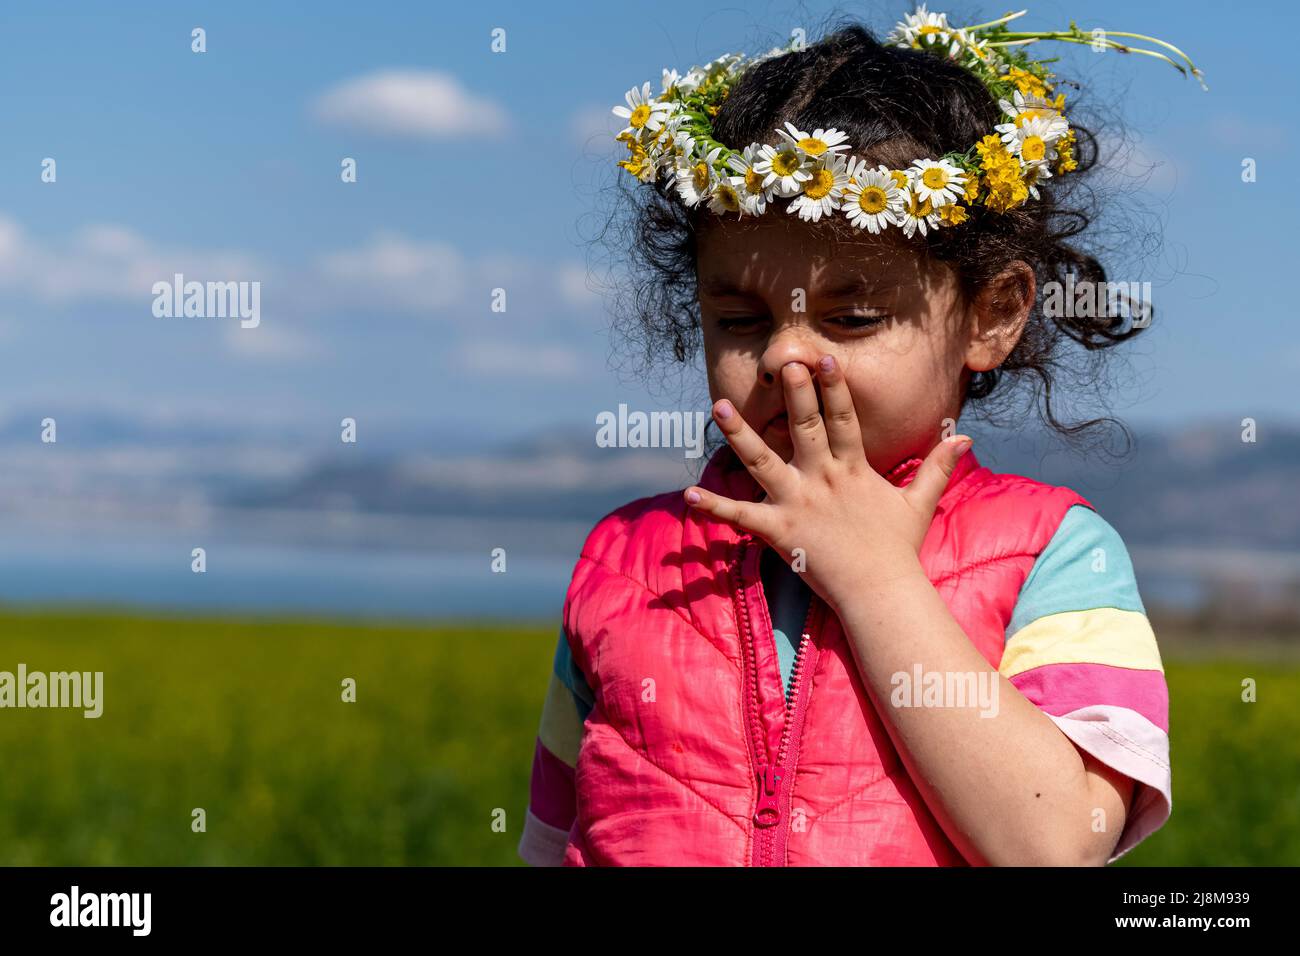 Selective focus shot from natural state of girl in colorful outfit wearing crown of daisies. Stock Photo